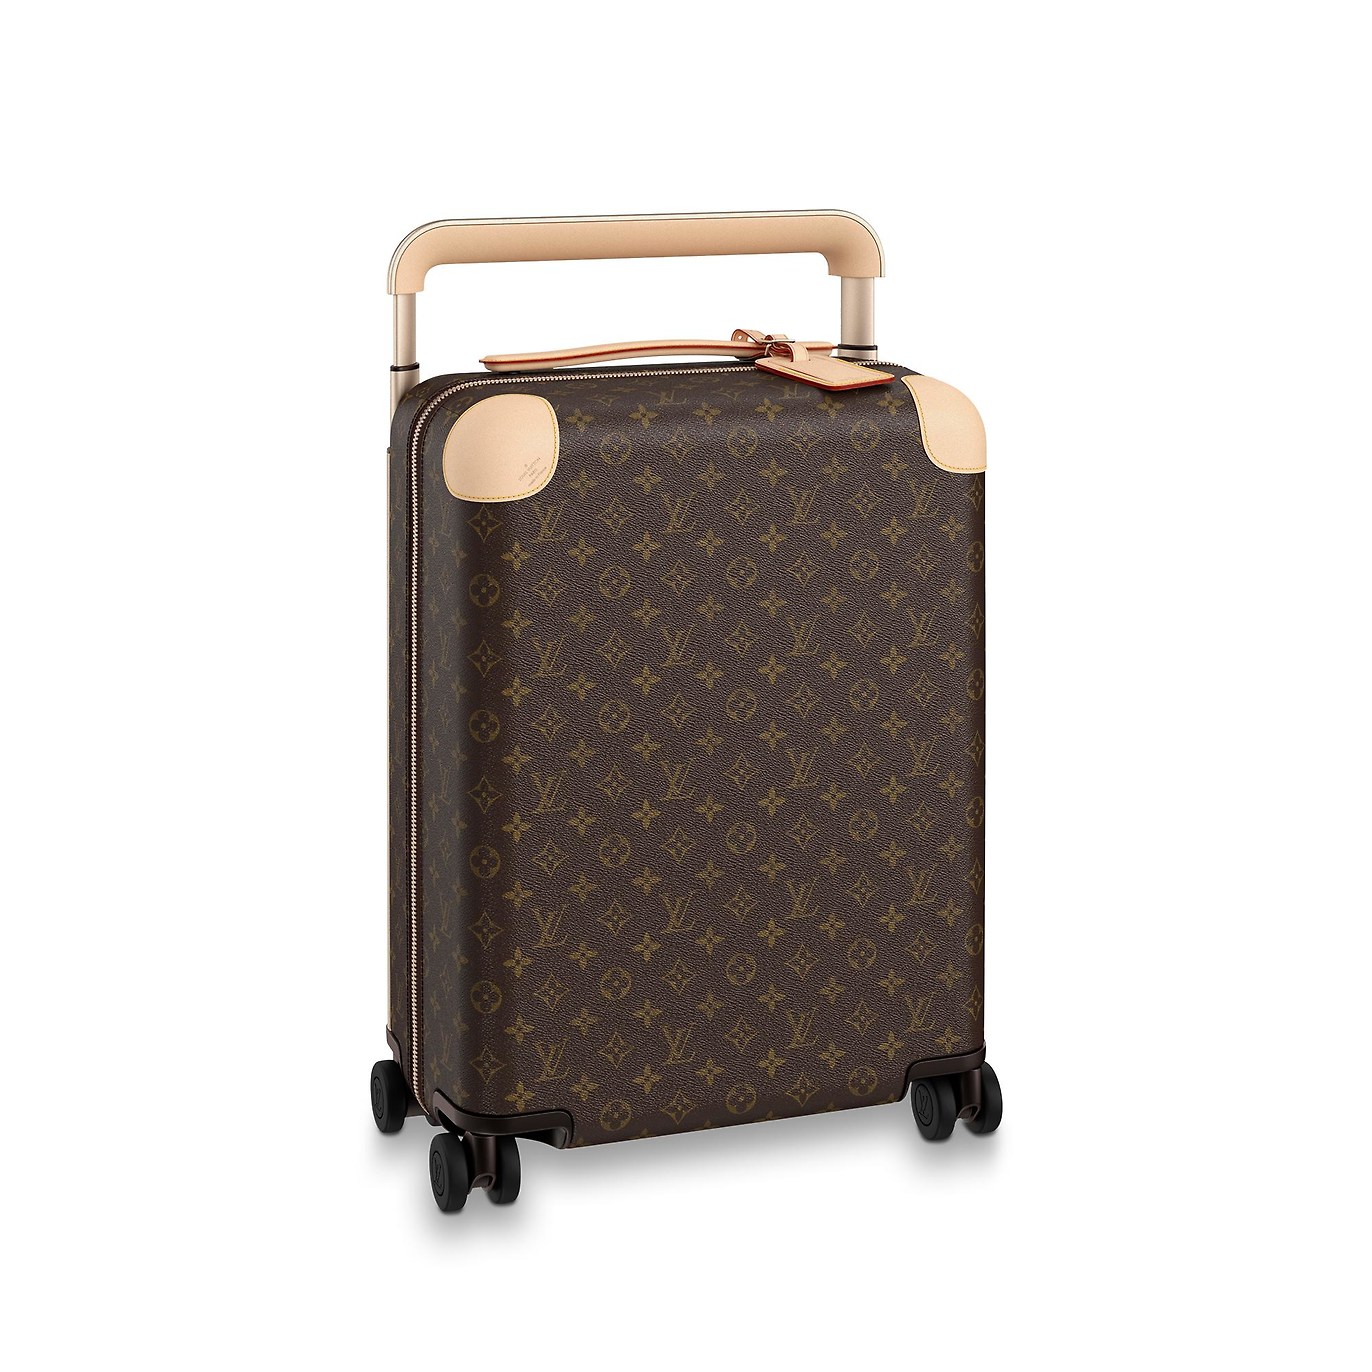 7 Designer Luggage Sets That Are Actually Worth the Investment